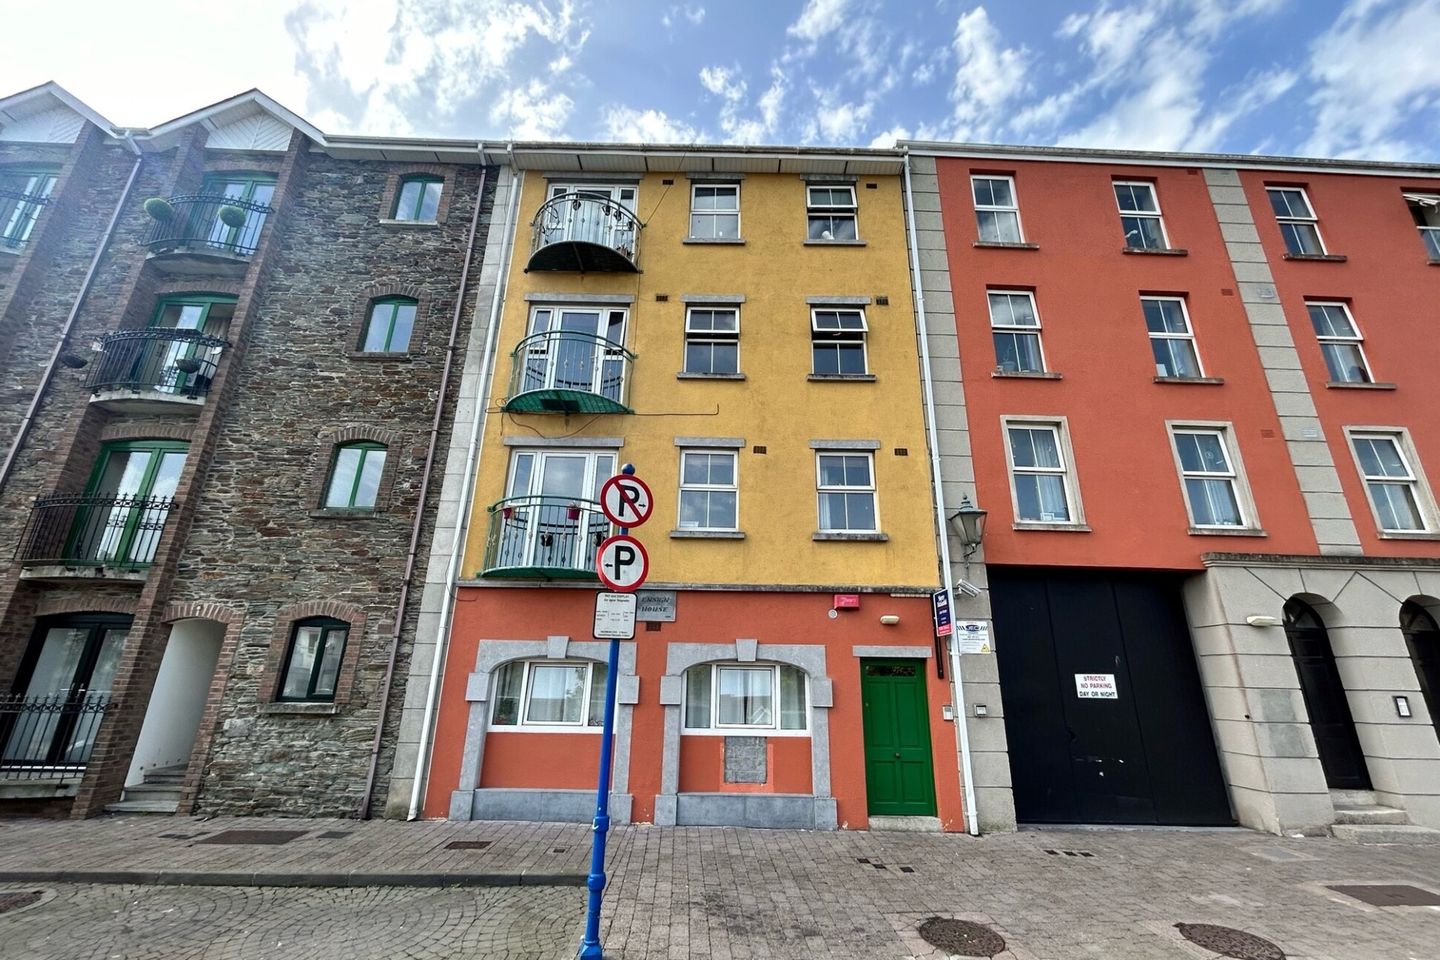 Apt. 4 Ensign House, Georges Quay, Waterford, X91HR23